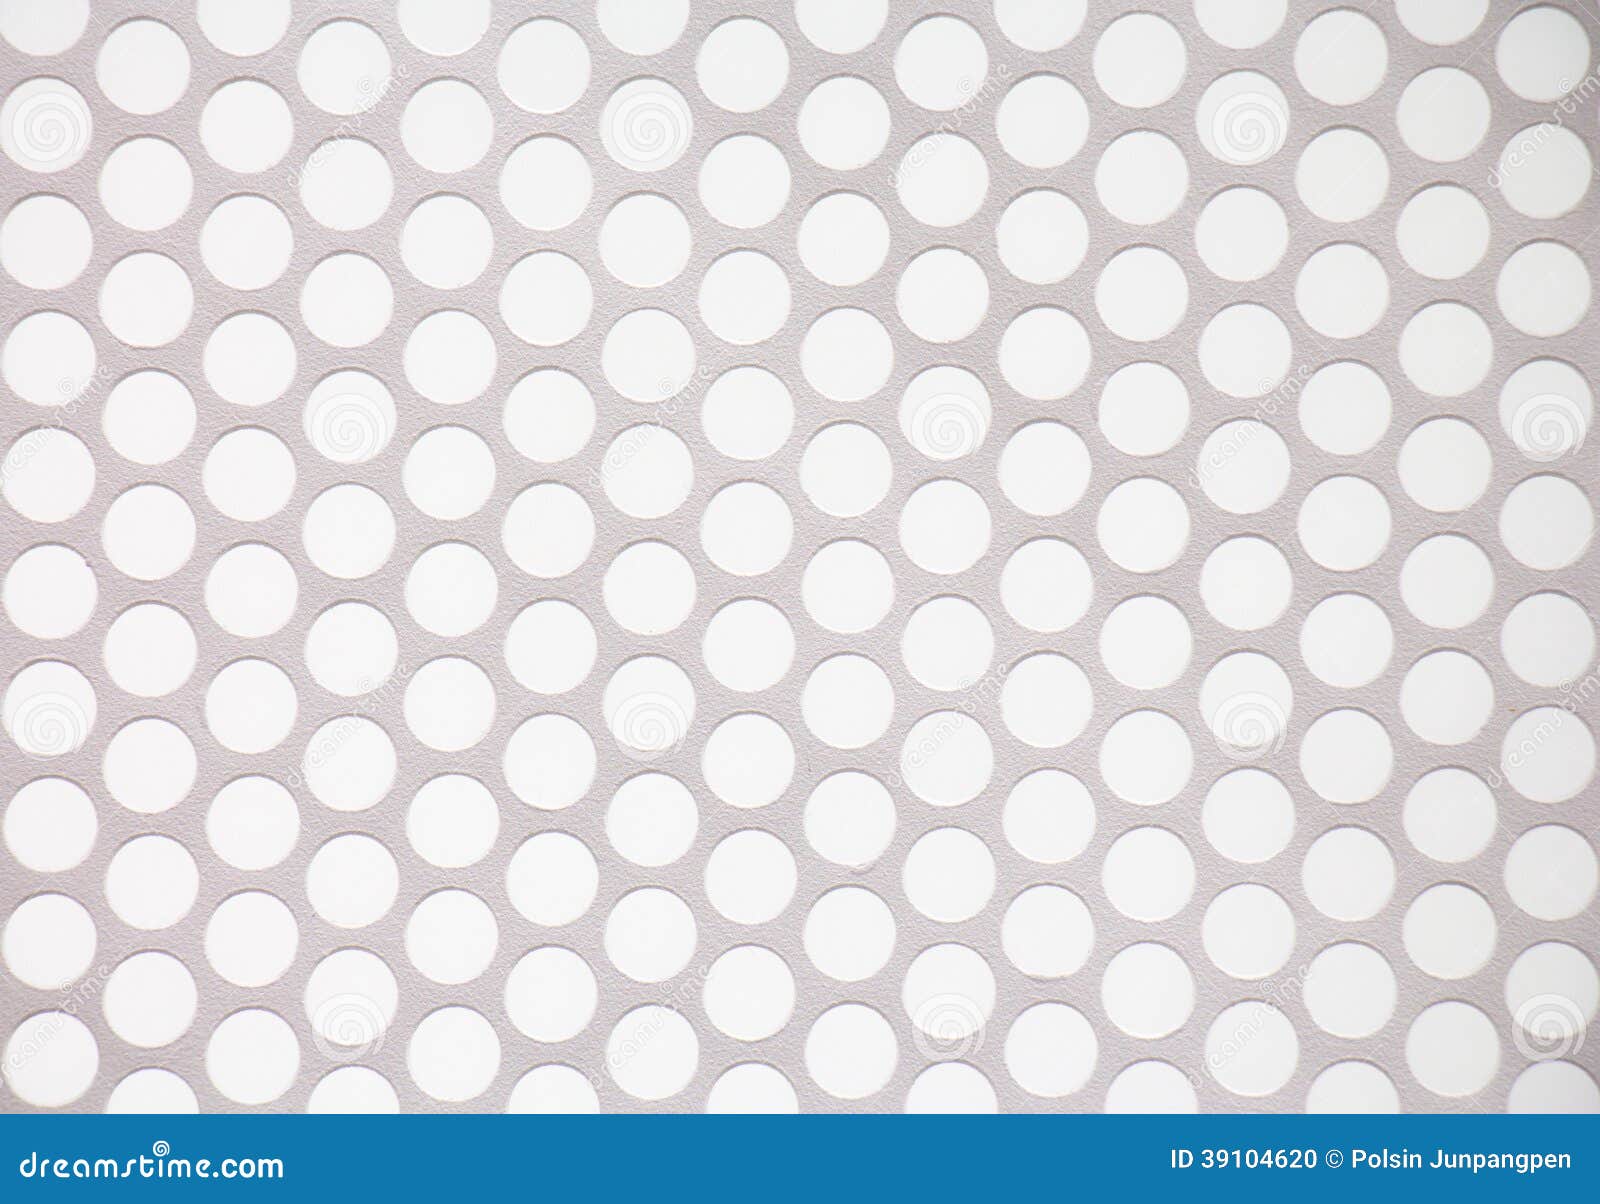 28,142 White Net Texture Stock Photos - Free & Royalty-Free Stock Photos  from Dreamstime